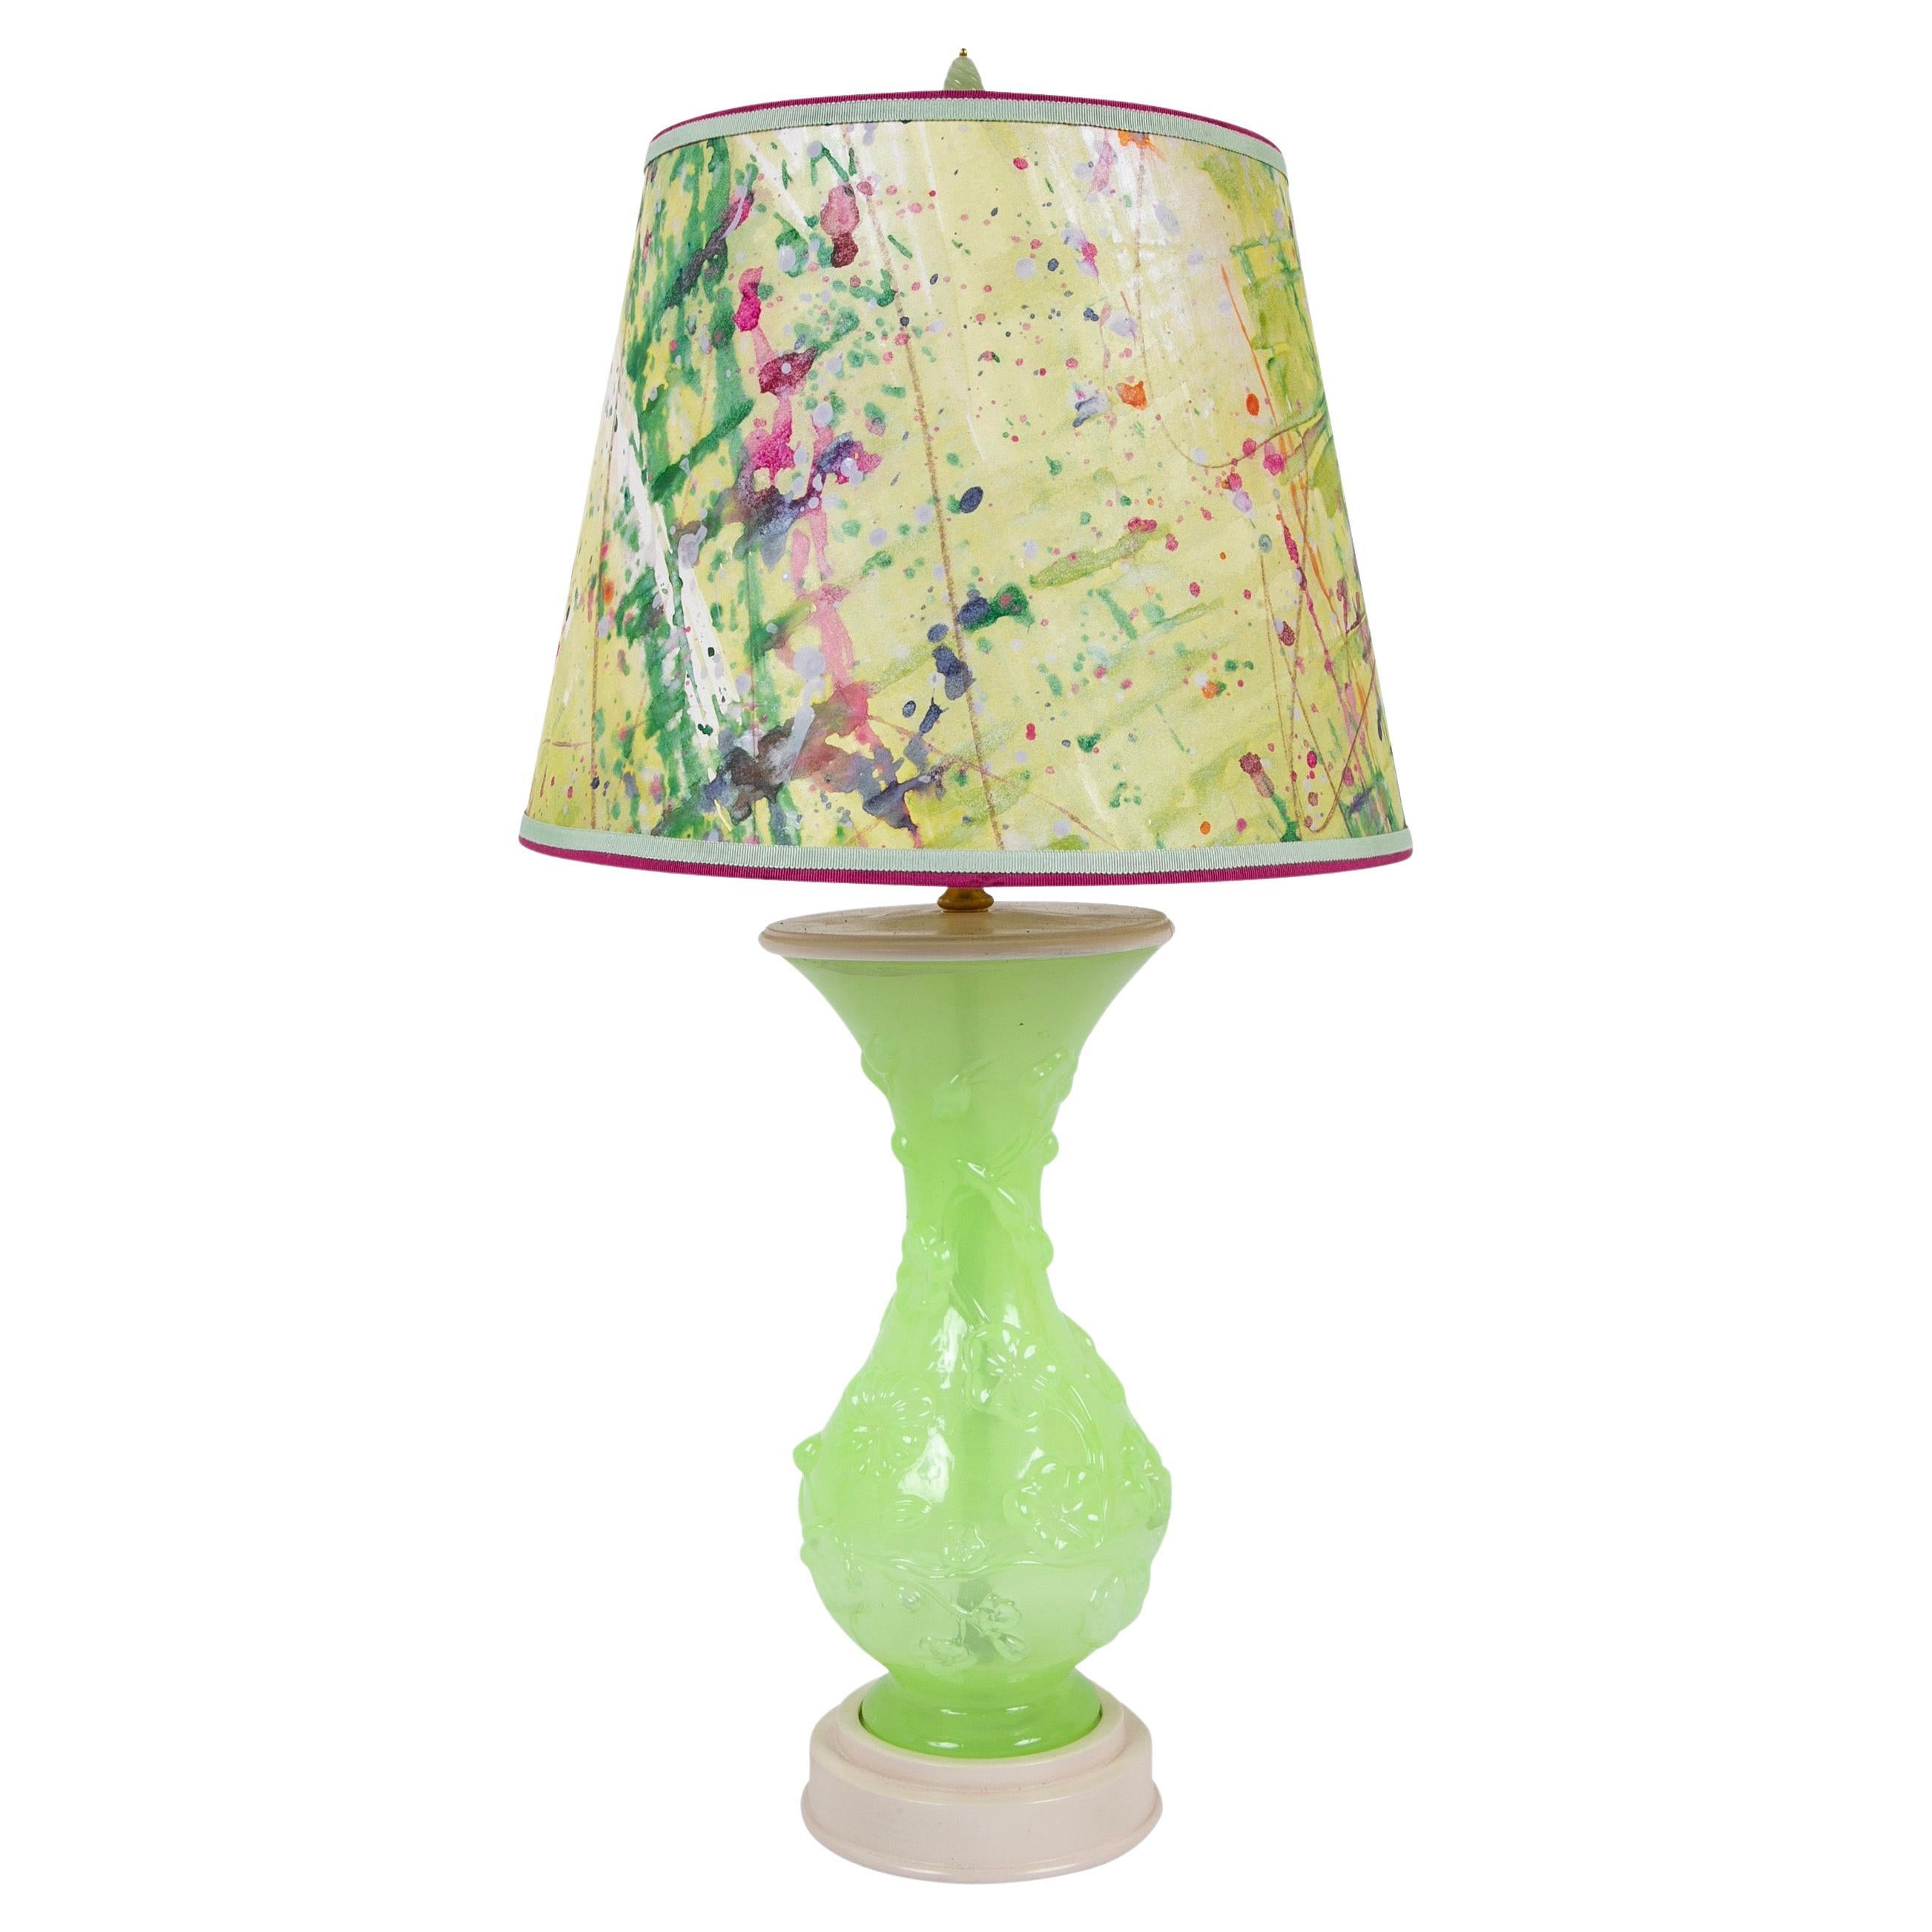 American Pressed Glass Vases now Table Lamps For Sale